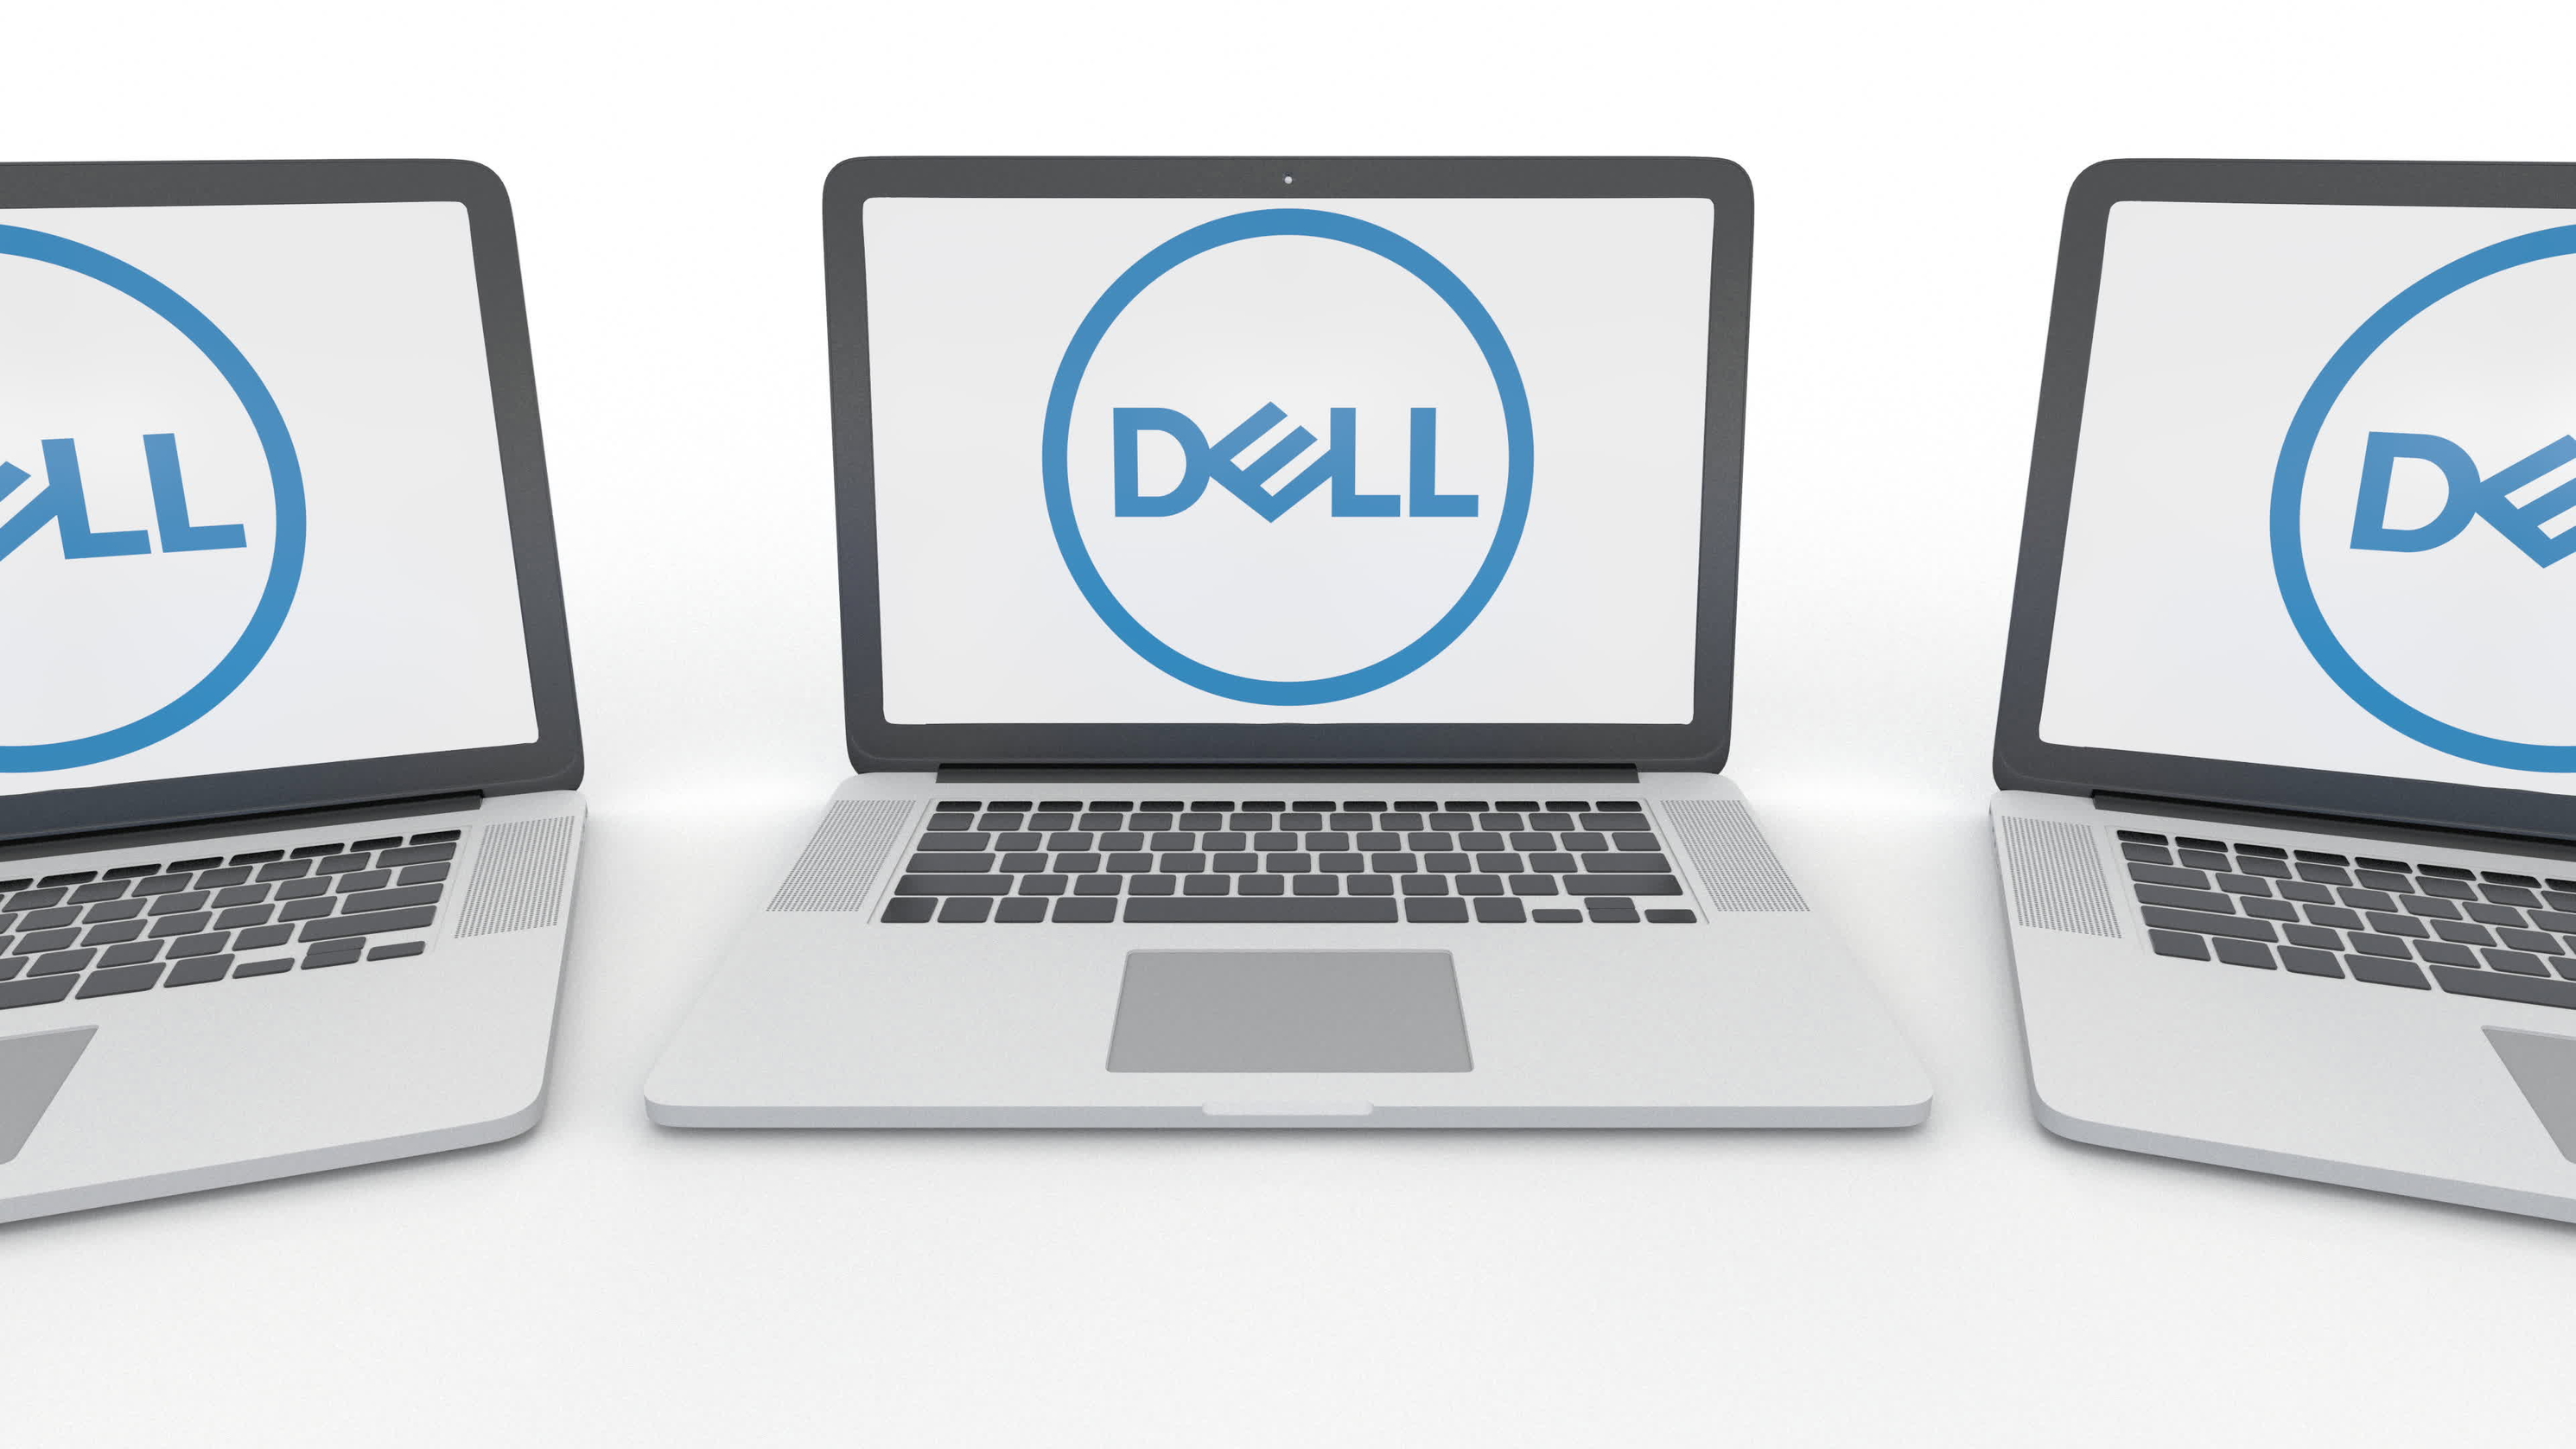 Dell coupons: Take 48% off any item